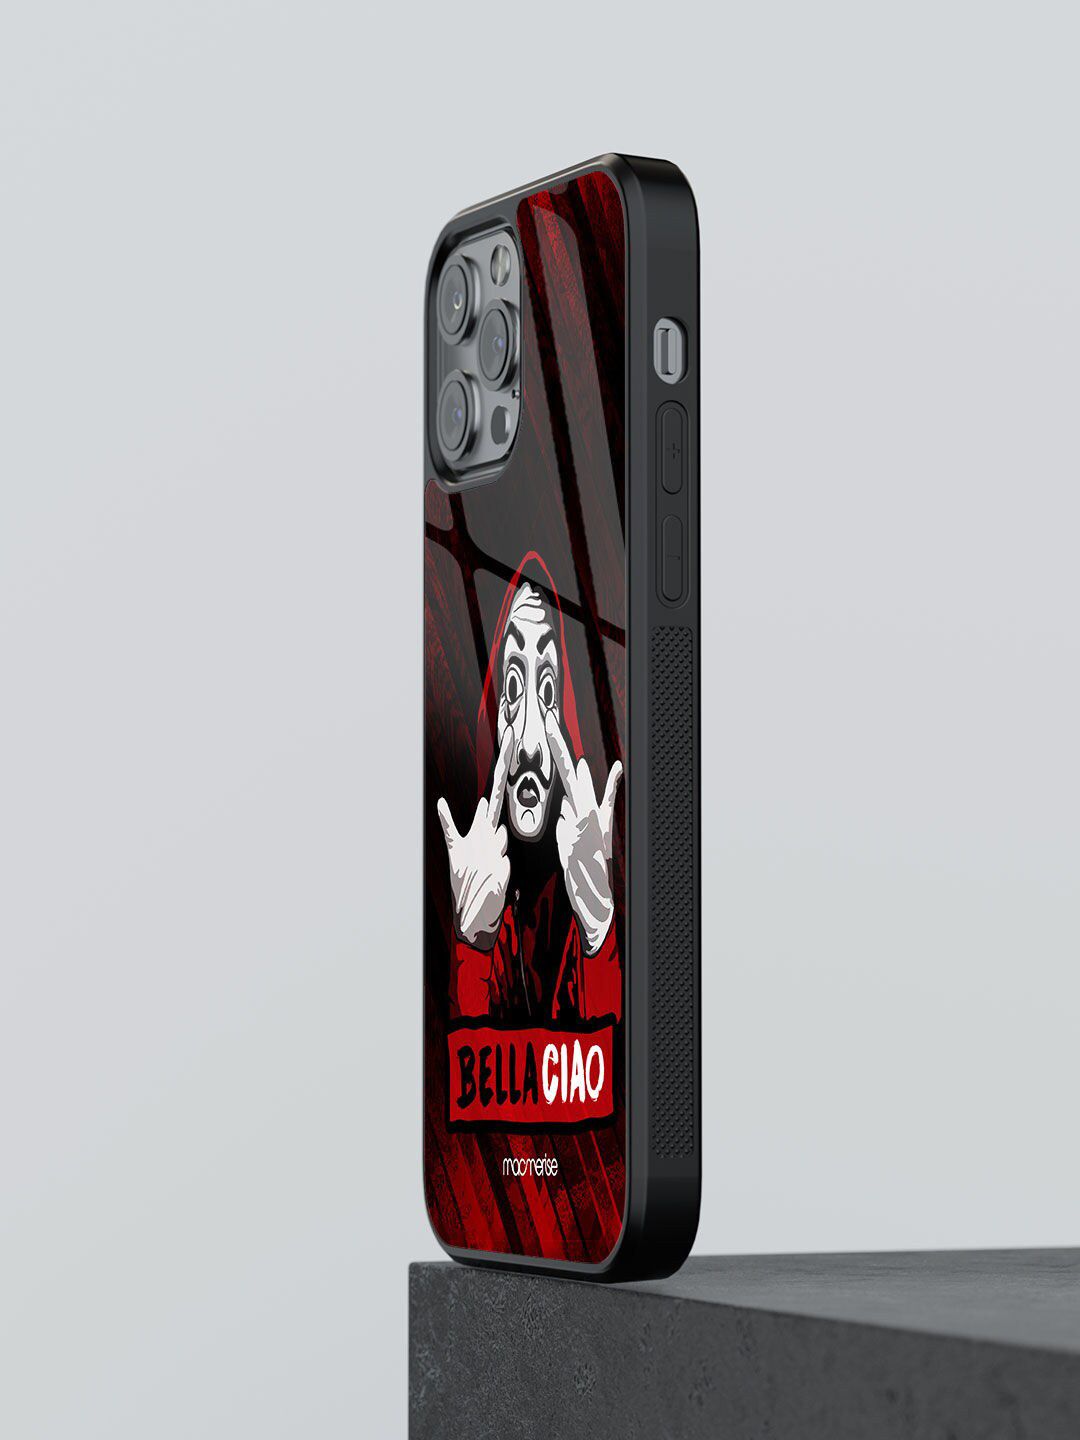 macmerise Black & Red Printed Bella Ciao Glass iPhone 12 Pro Back Case Cover Price in India